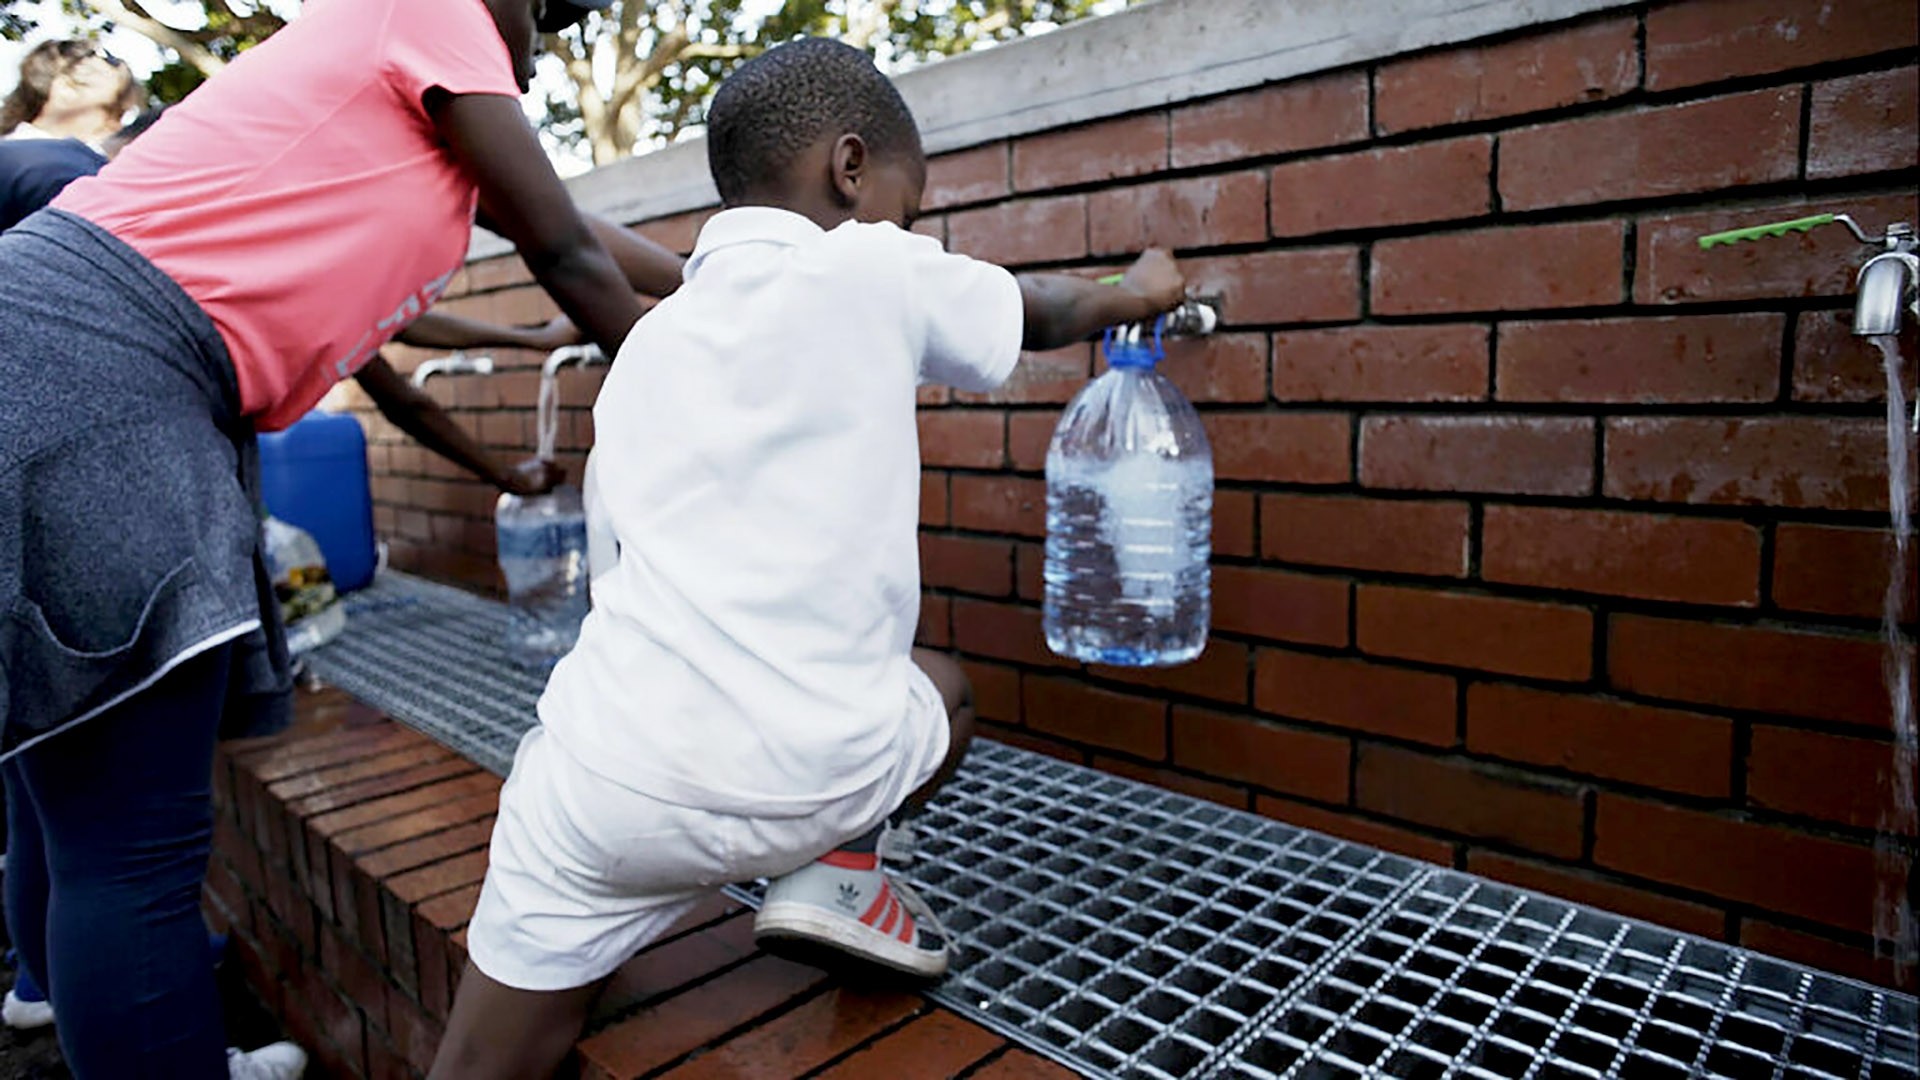 Young boy filling a water bottle